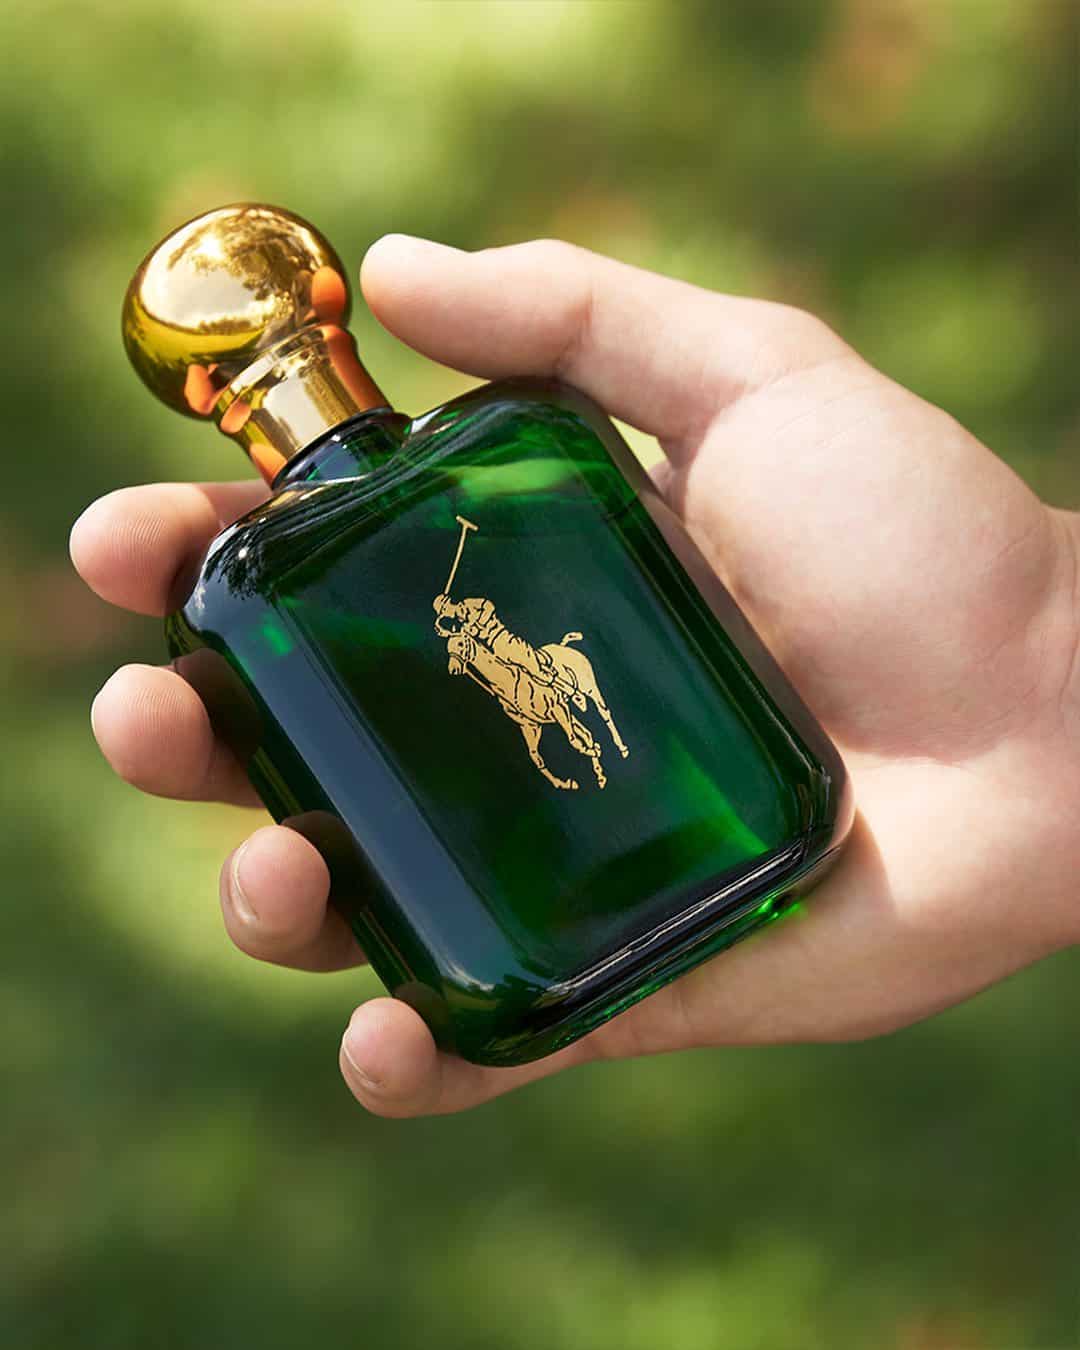 holding a bottle of ralph lauren polo cologne